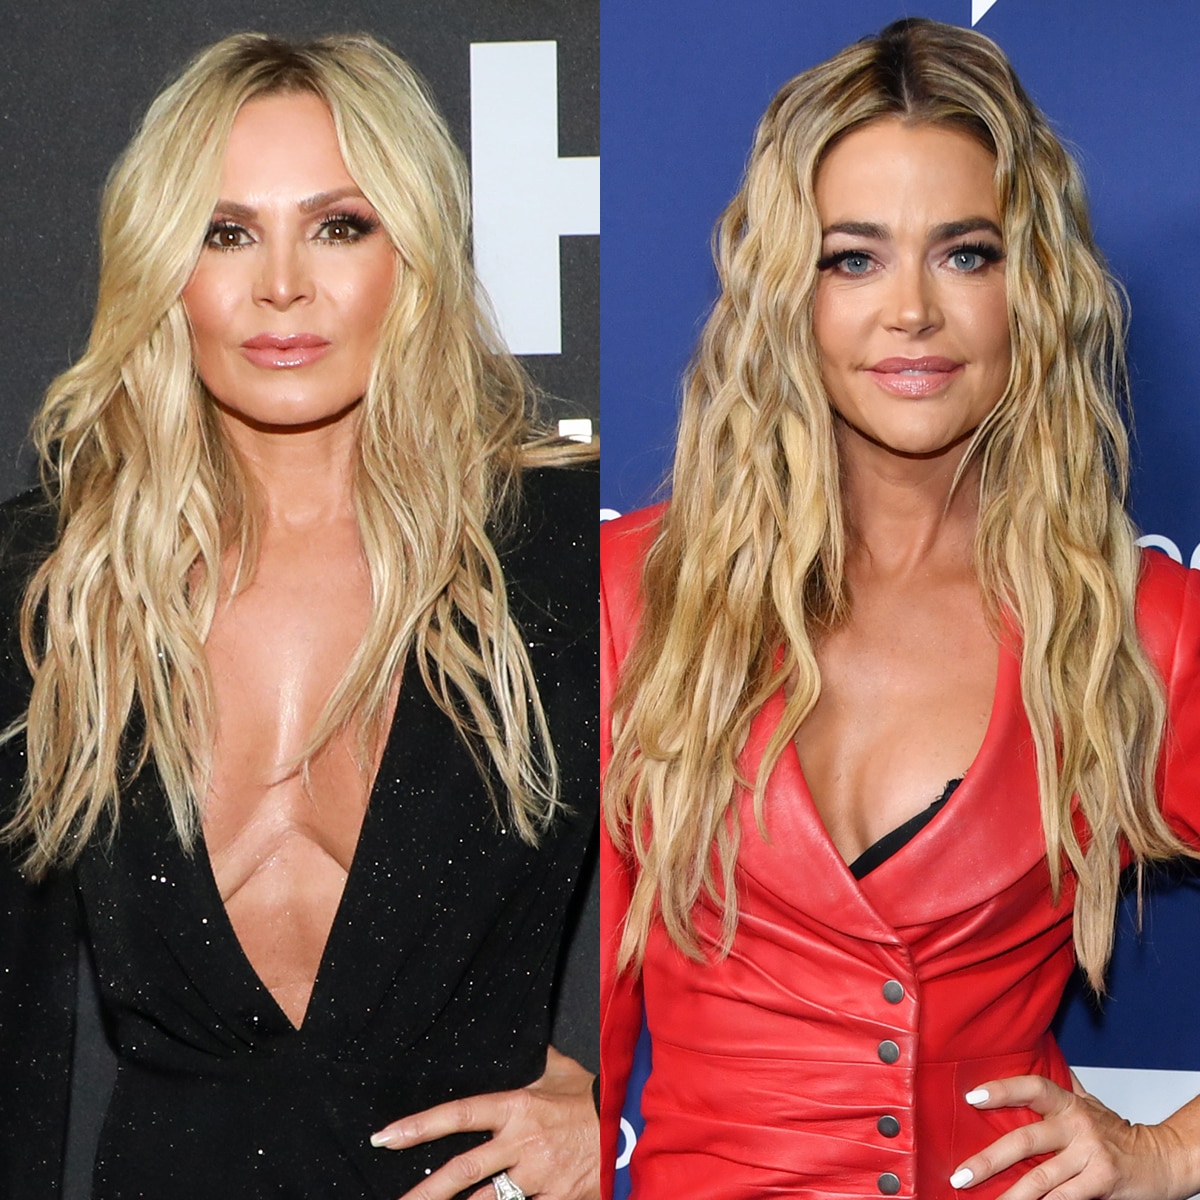 Tamra Judge Says Denise Richards Tried to Hook Up With pic photo